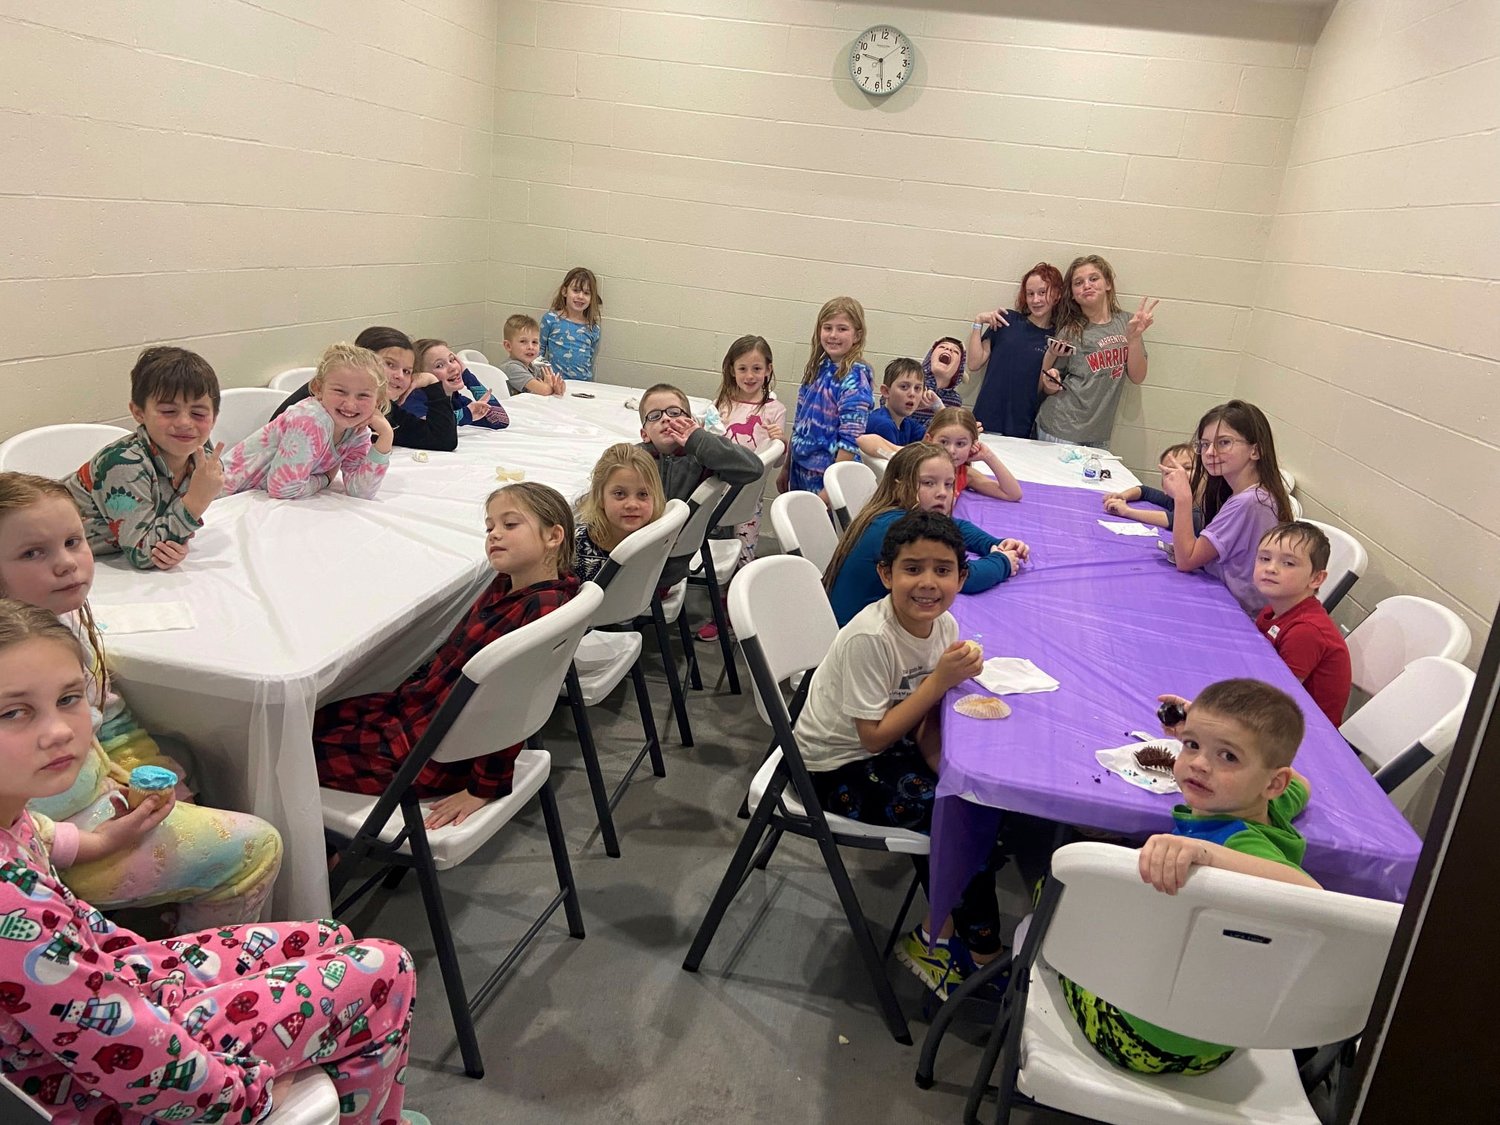 Kids wind down after an evening swimming at the 2022 Splash 'N Pajama party at the Warrenton Aquatic Center.